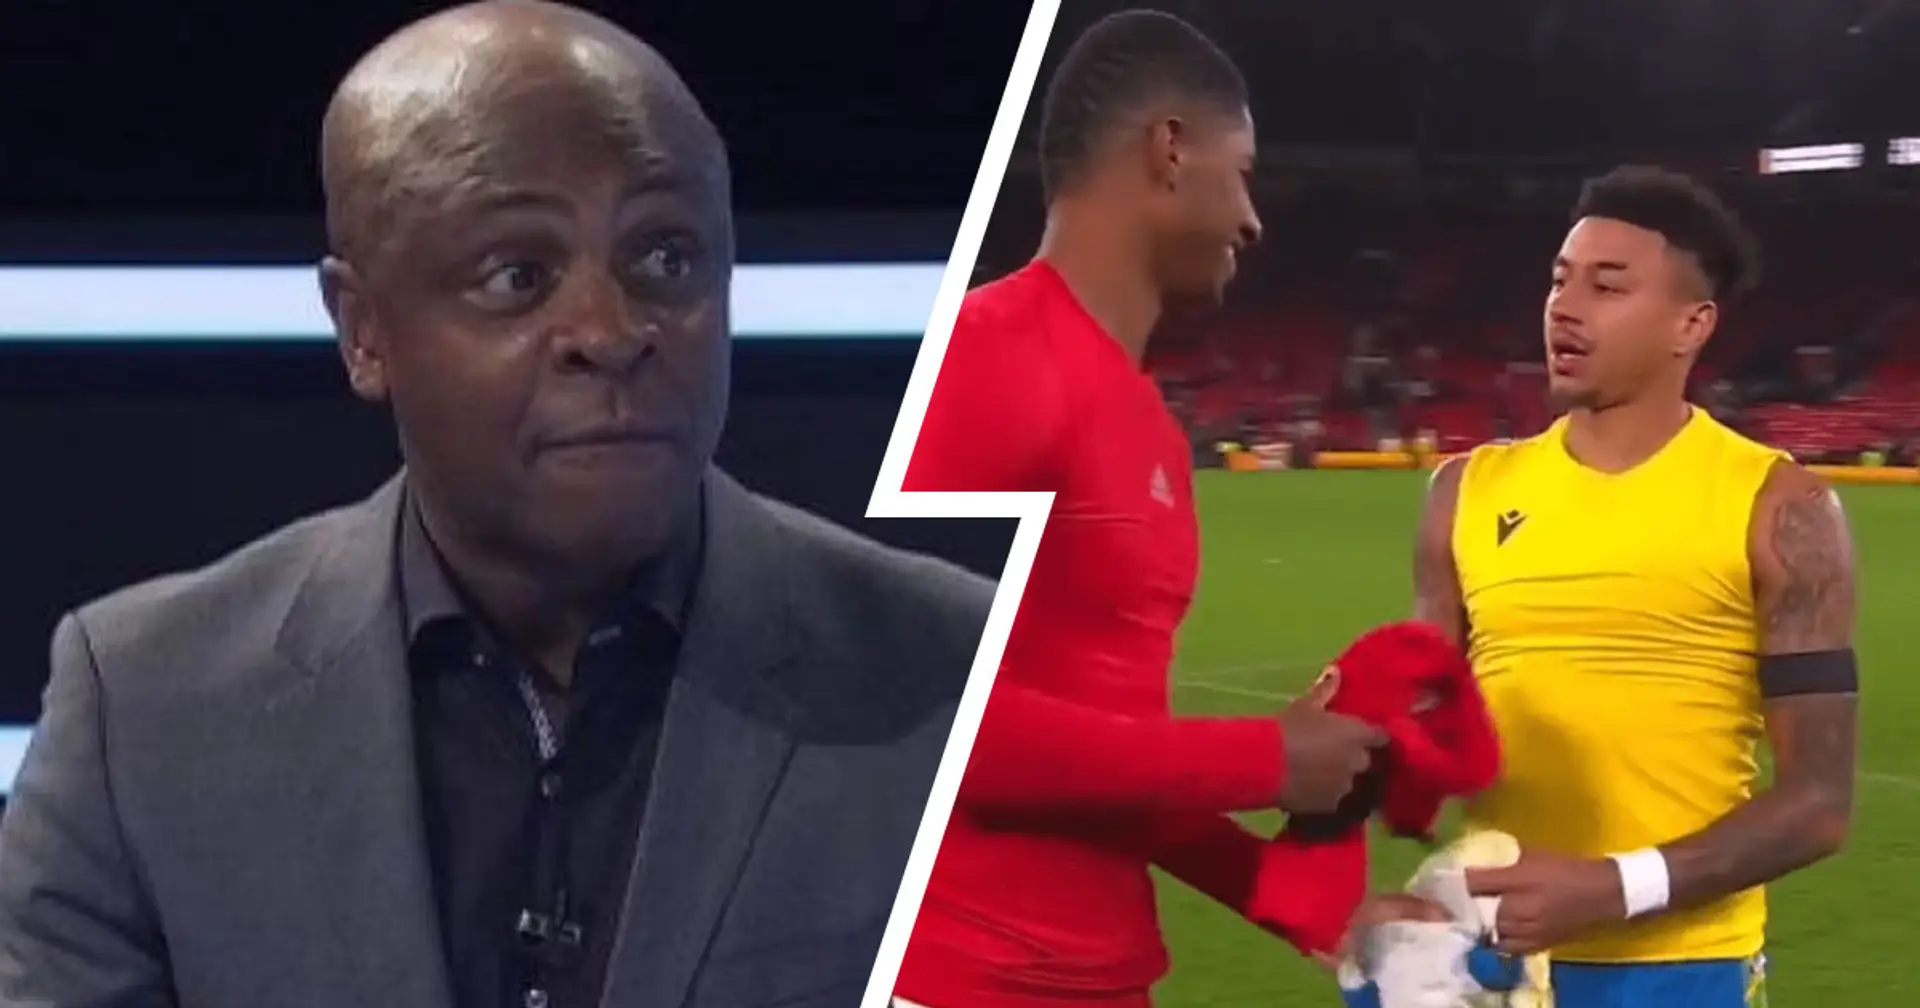 'He wasn't good enough': Paul Parker slams Lingard for making false accusations against United